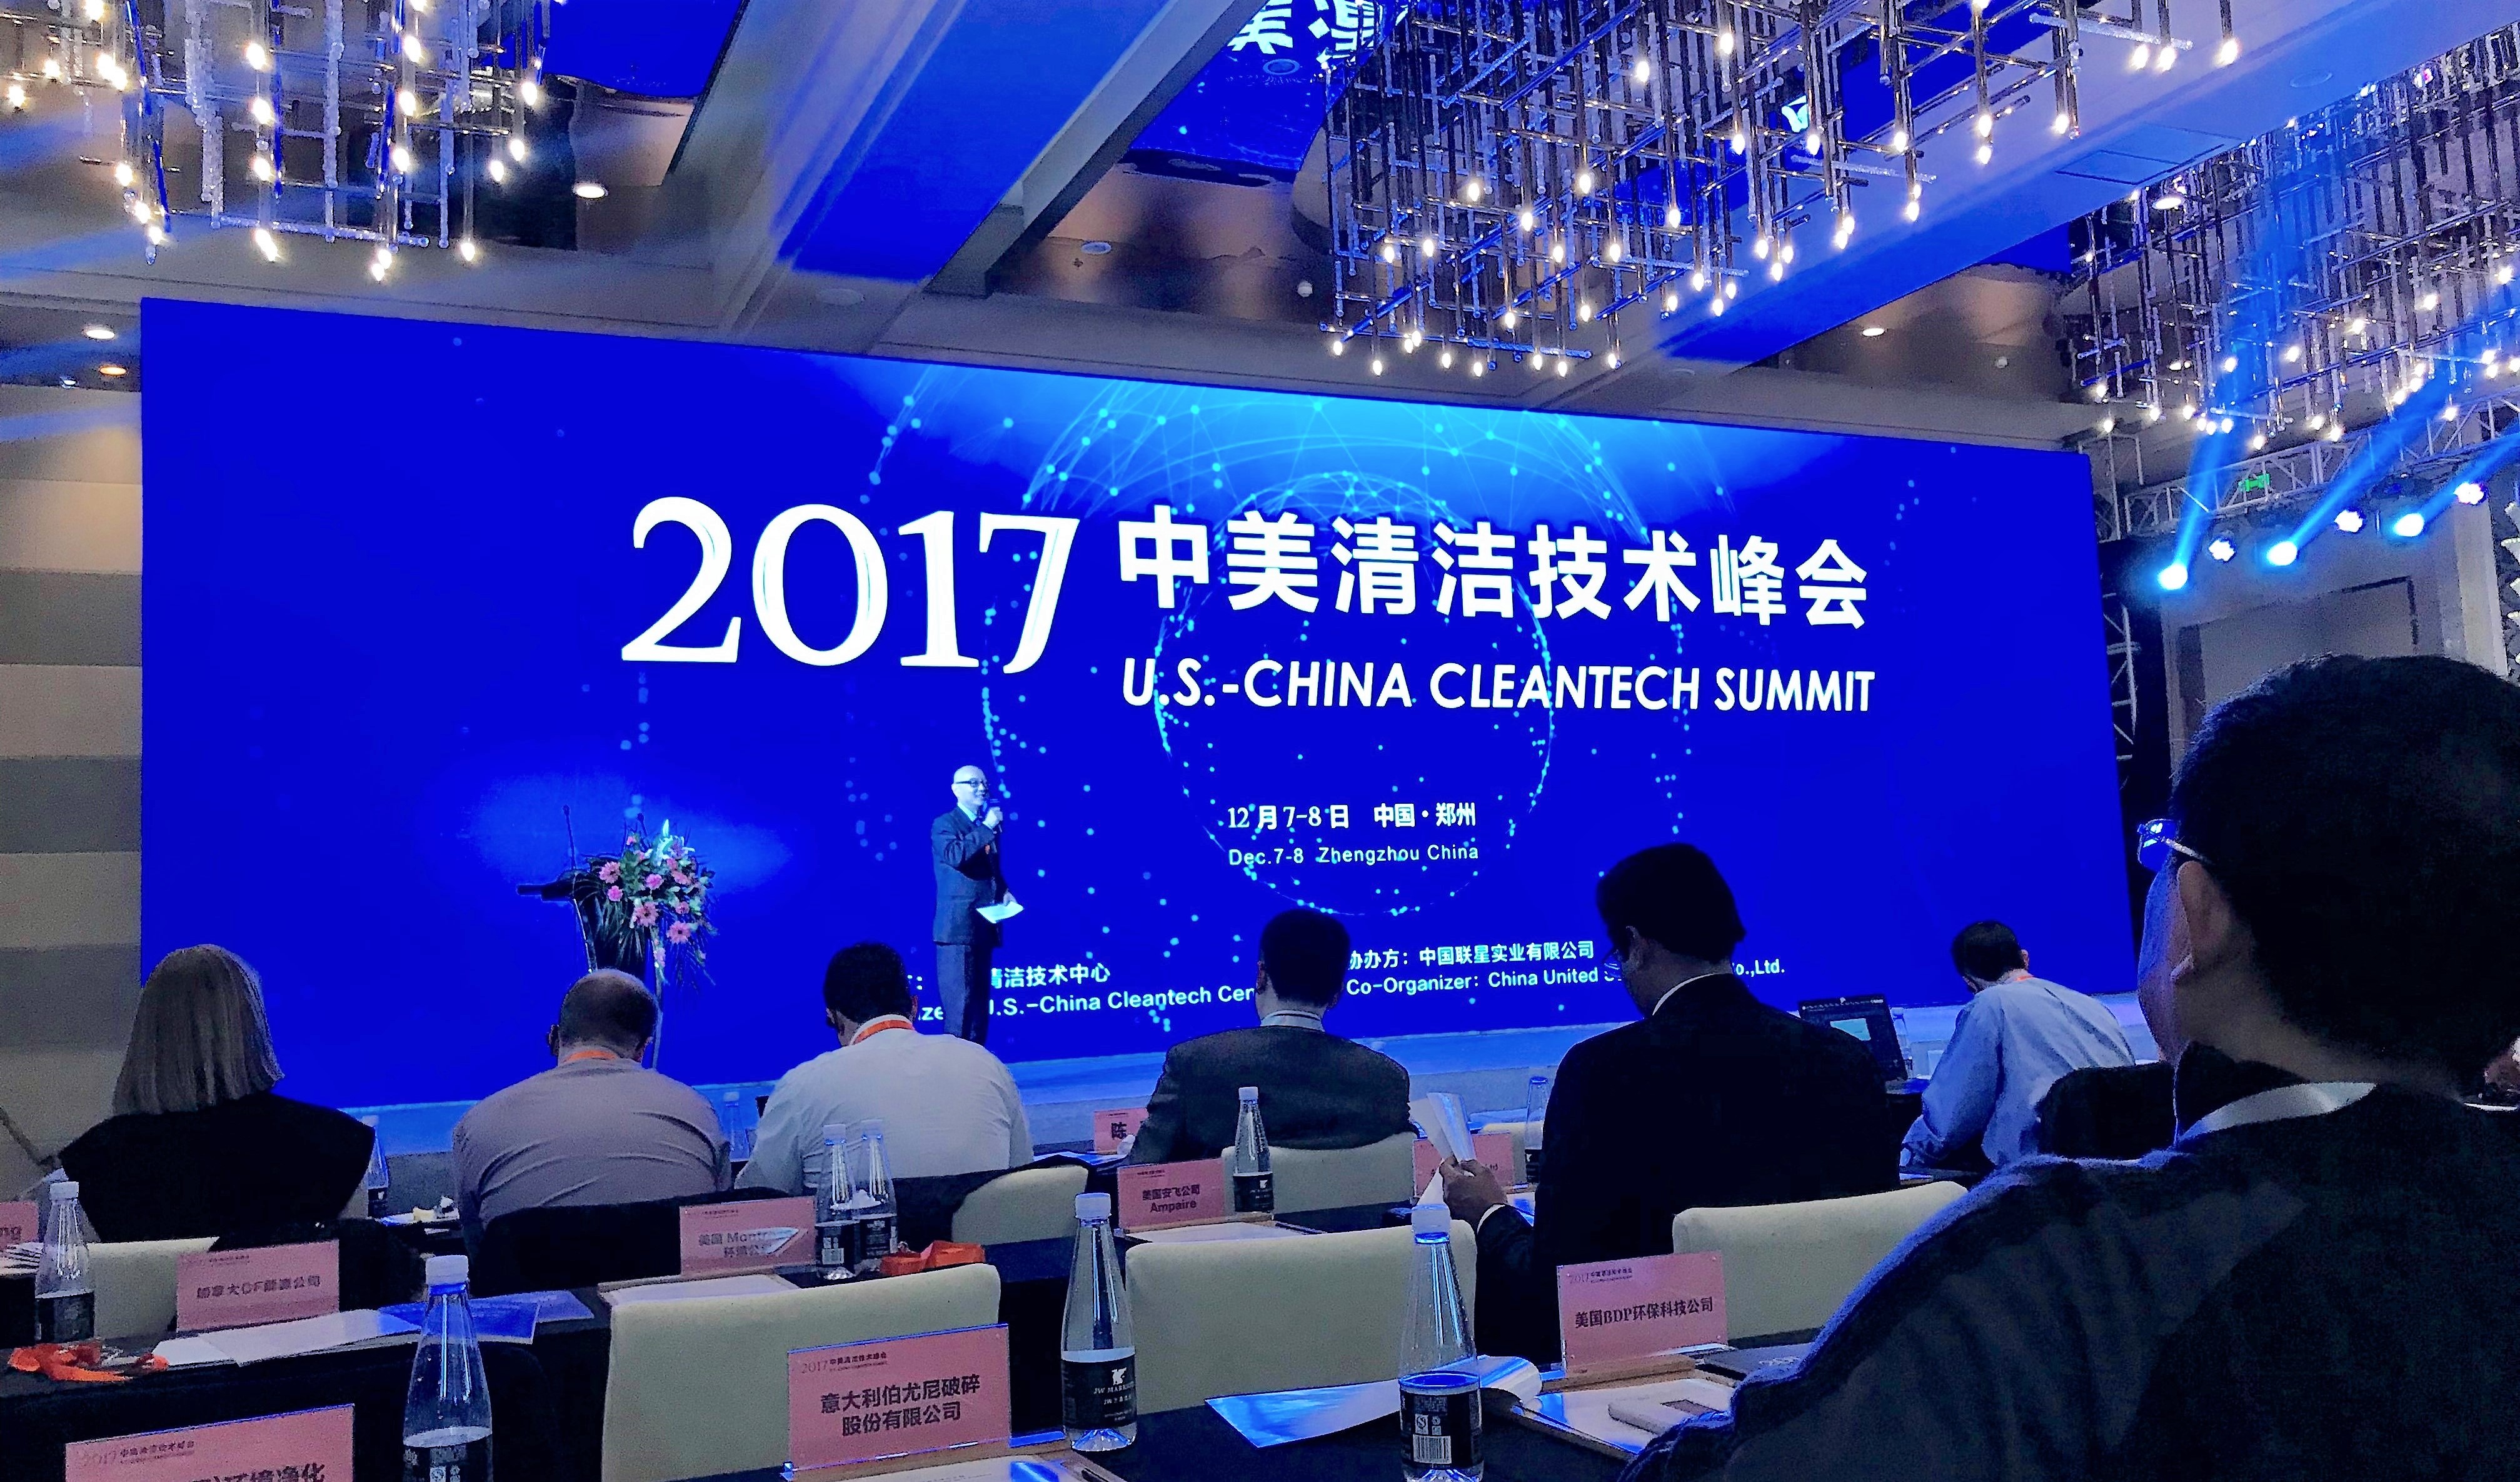 UCCTC holds our annual US-China Cleantech Summit in Zhengzhou